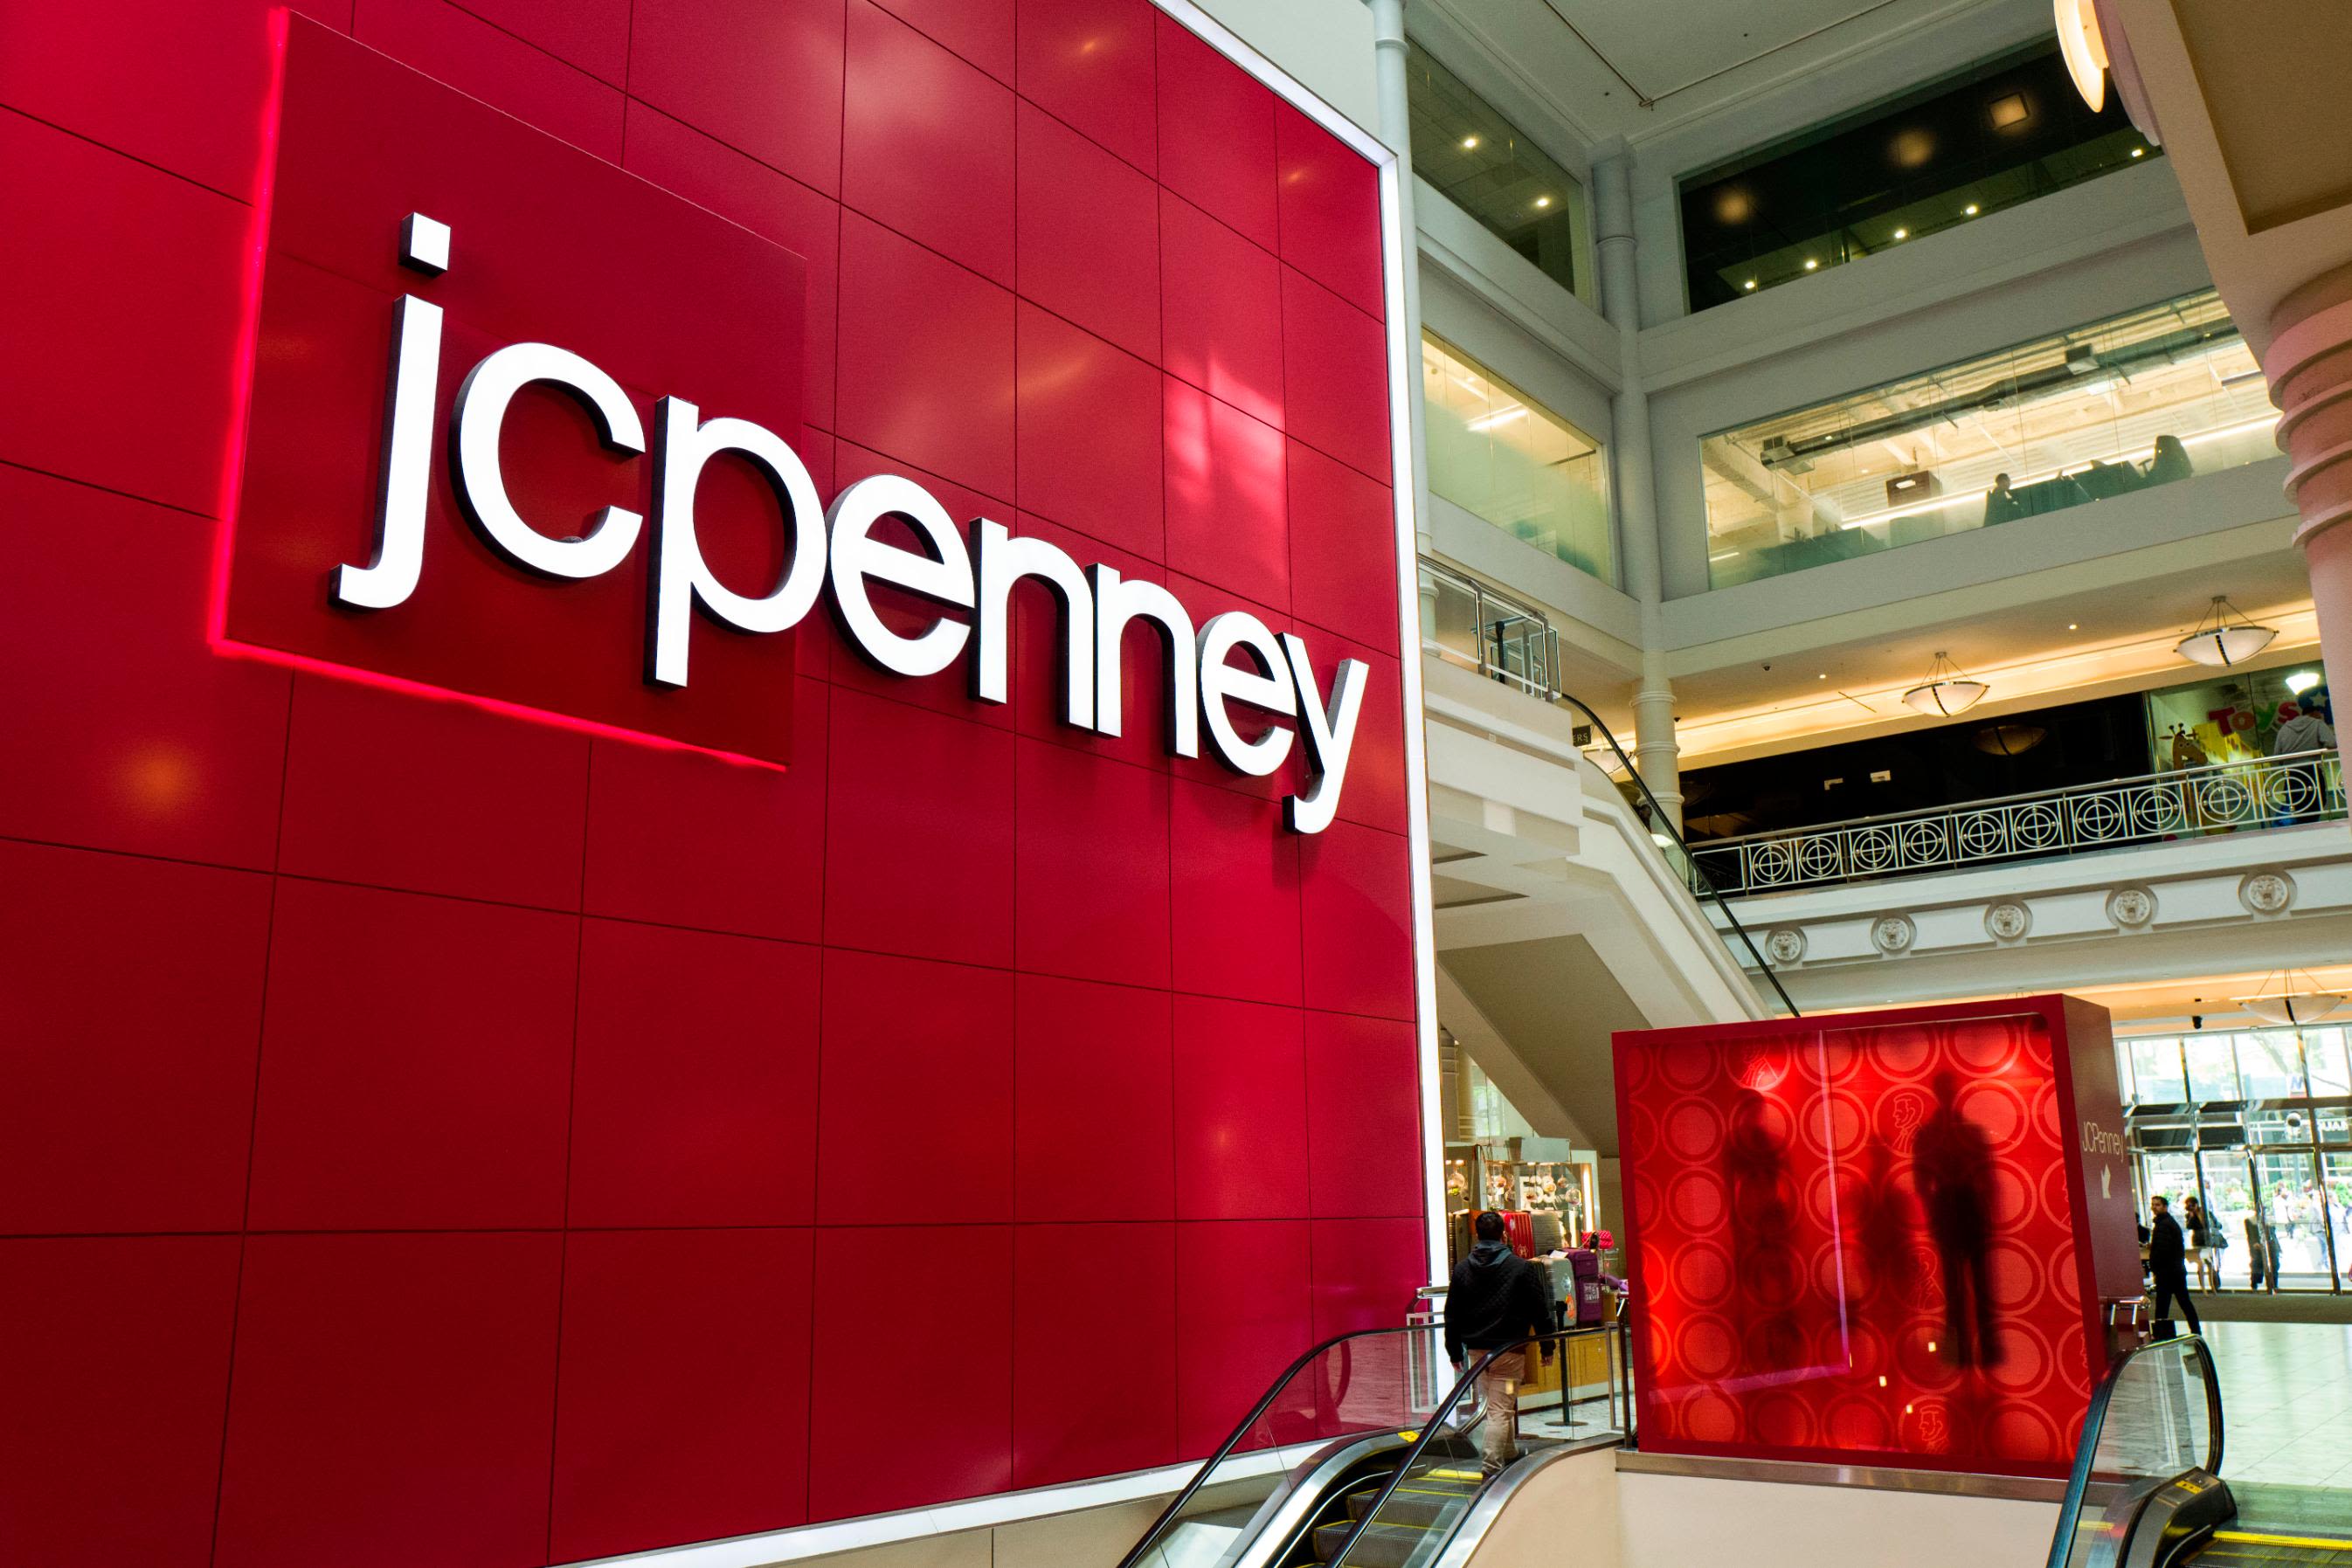 JCPenney spends over $1billion to make store changes after emerging from  bankruptcy - as CEO says 'now is the time